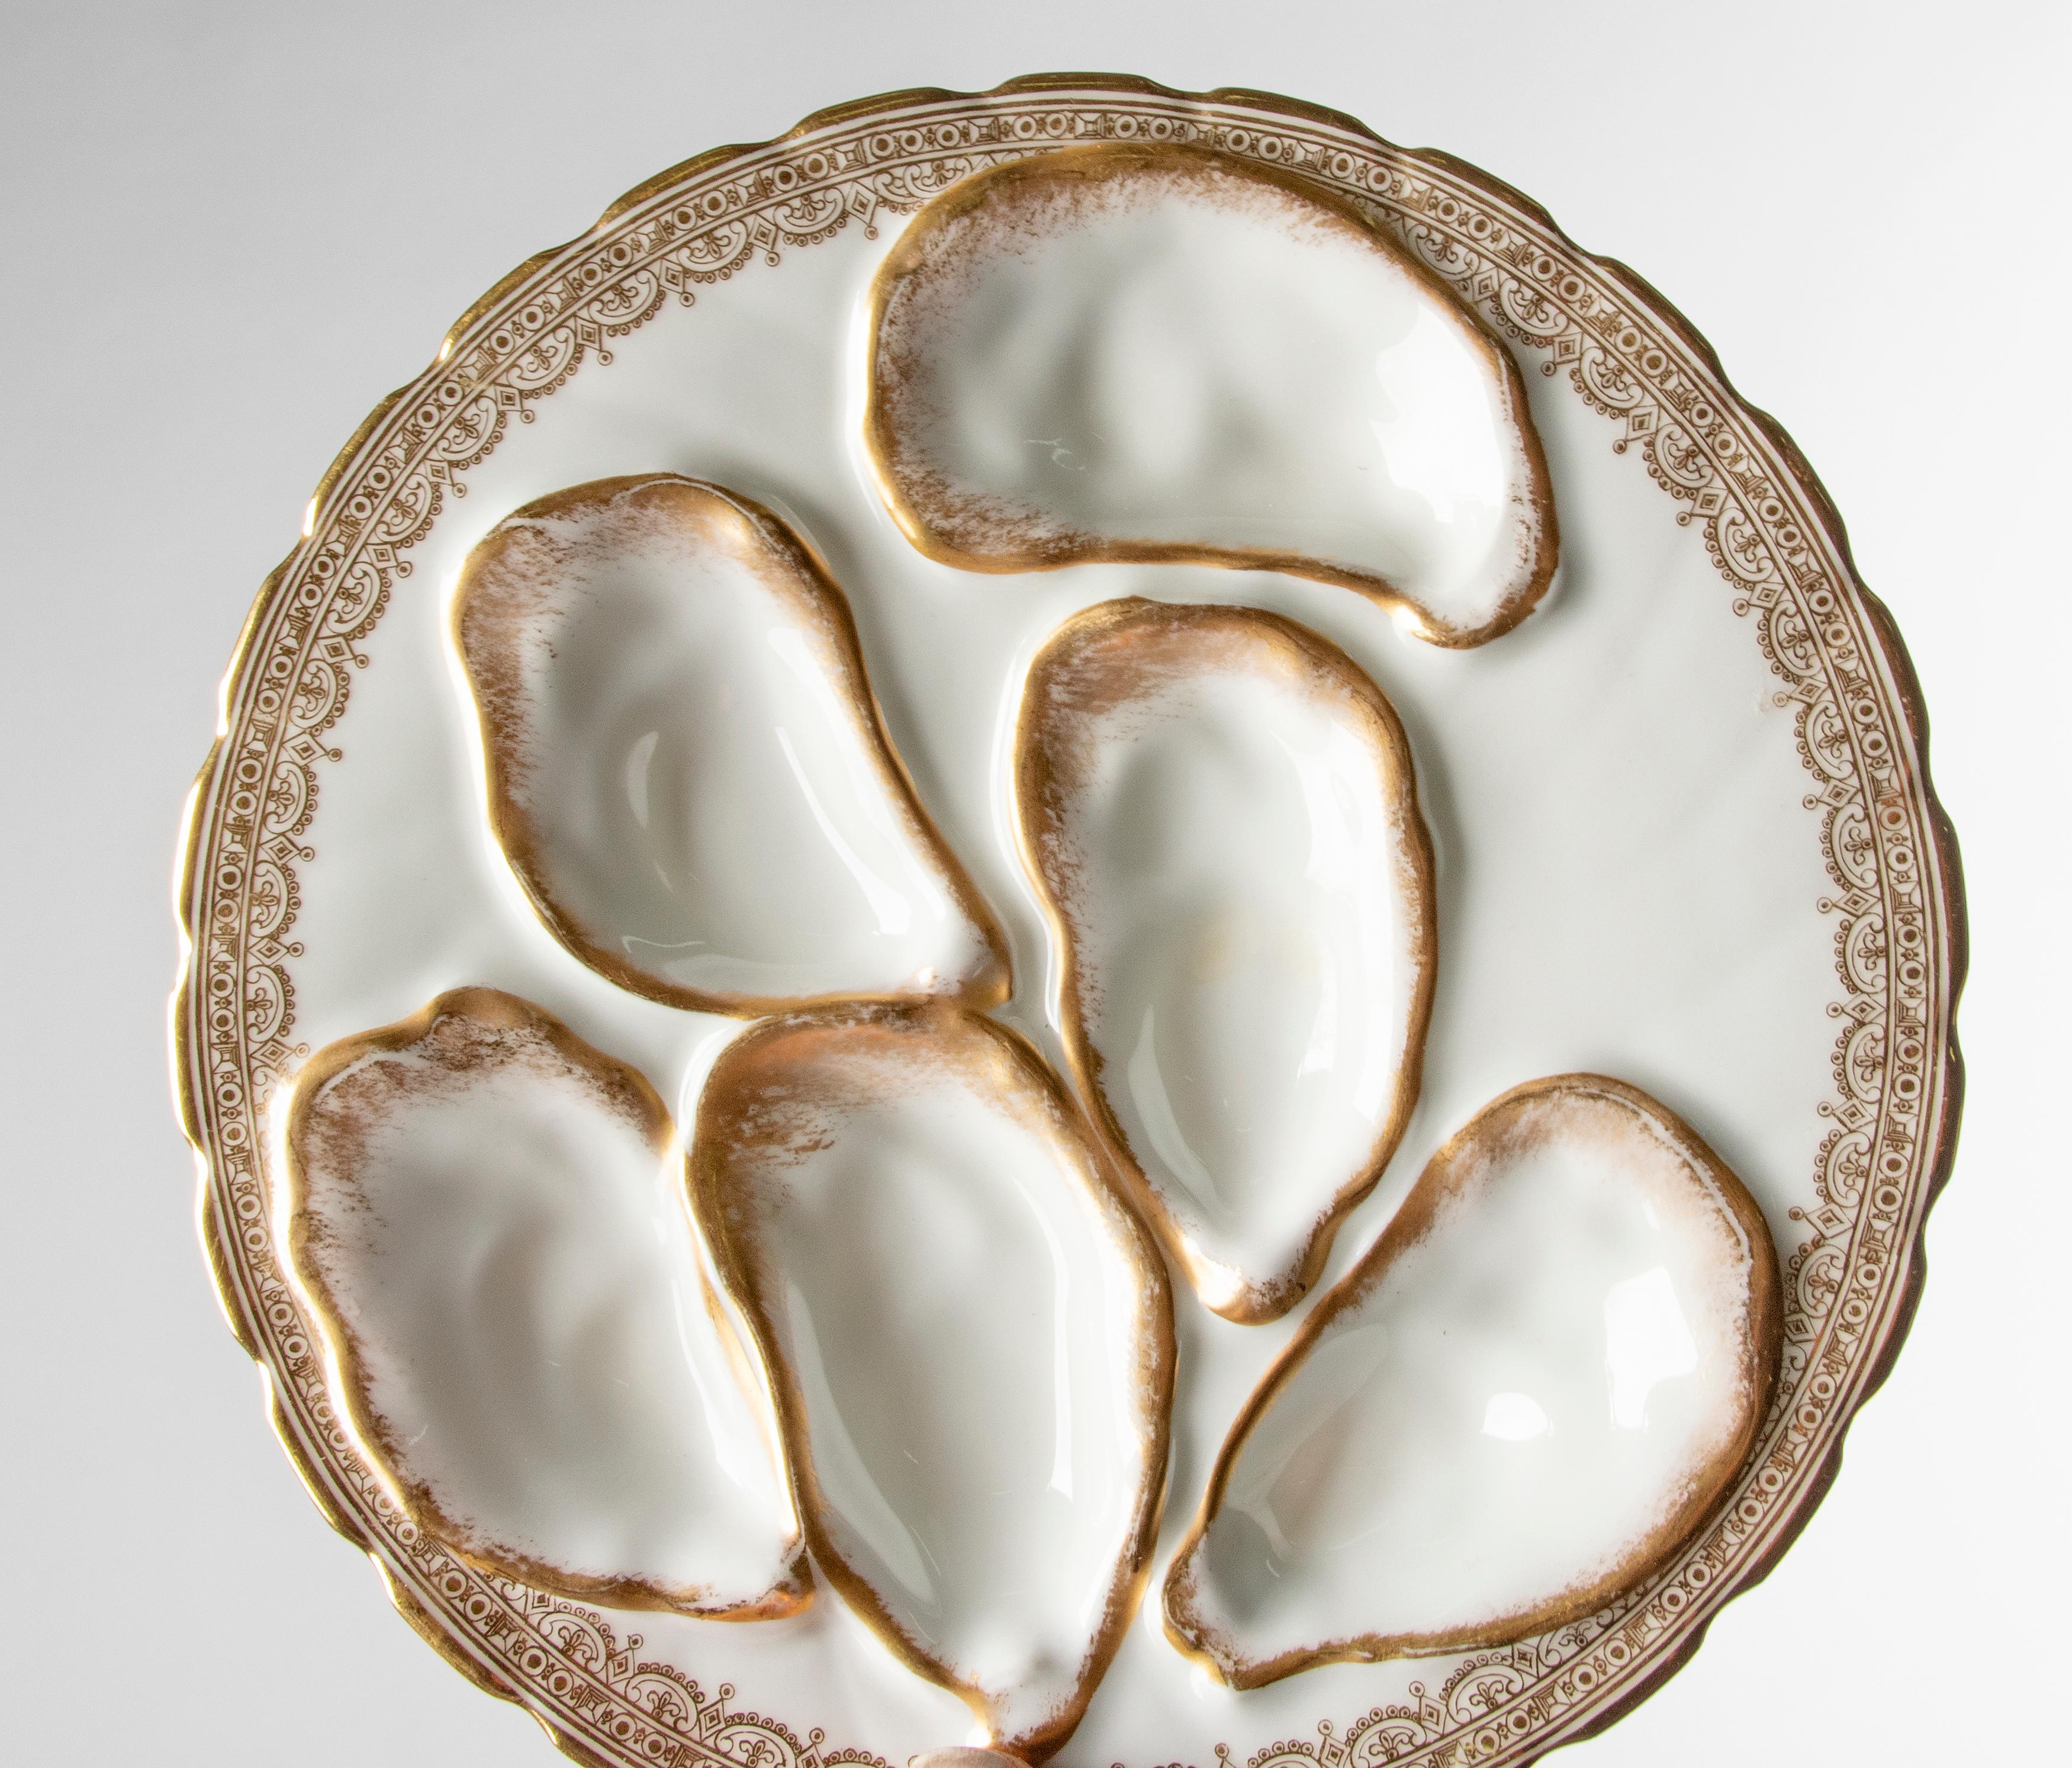 Two 19th Century Porcelain Oyster Plates by Haviland Limoges 3